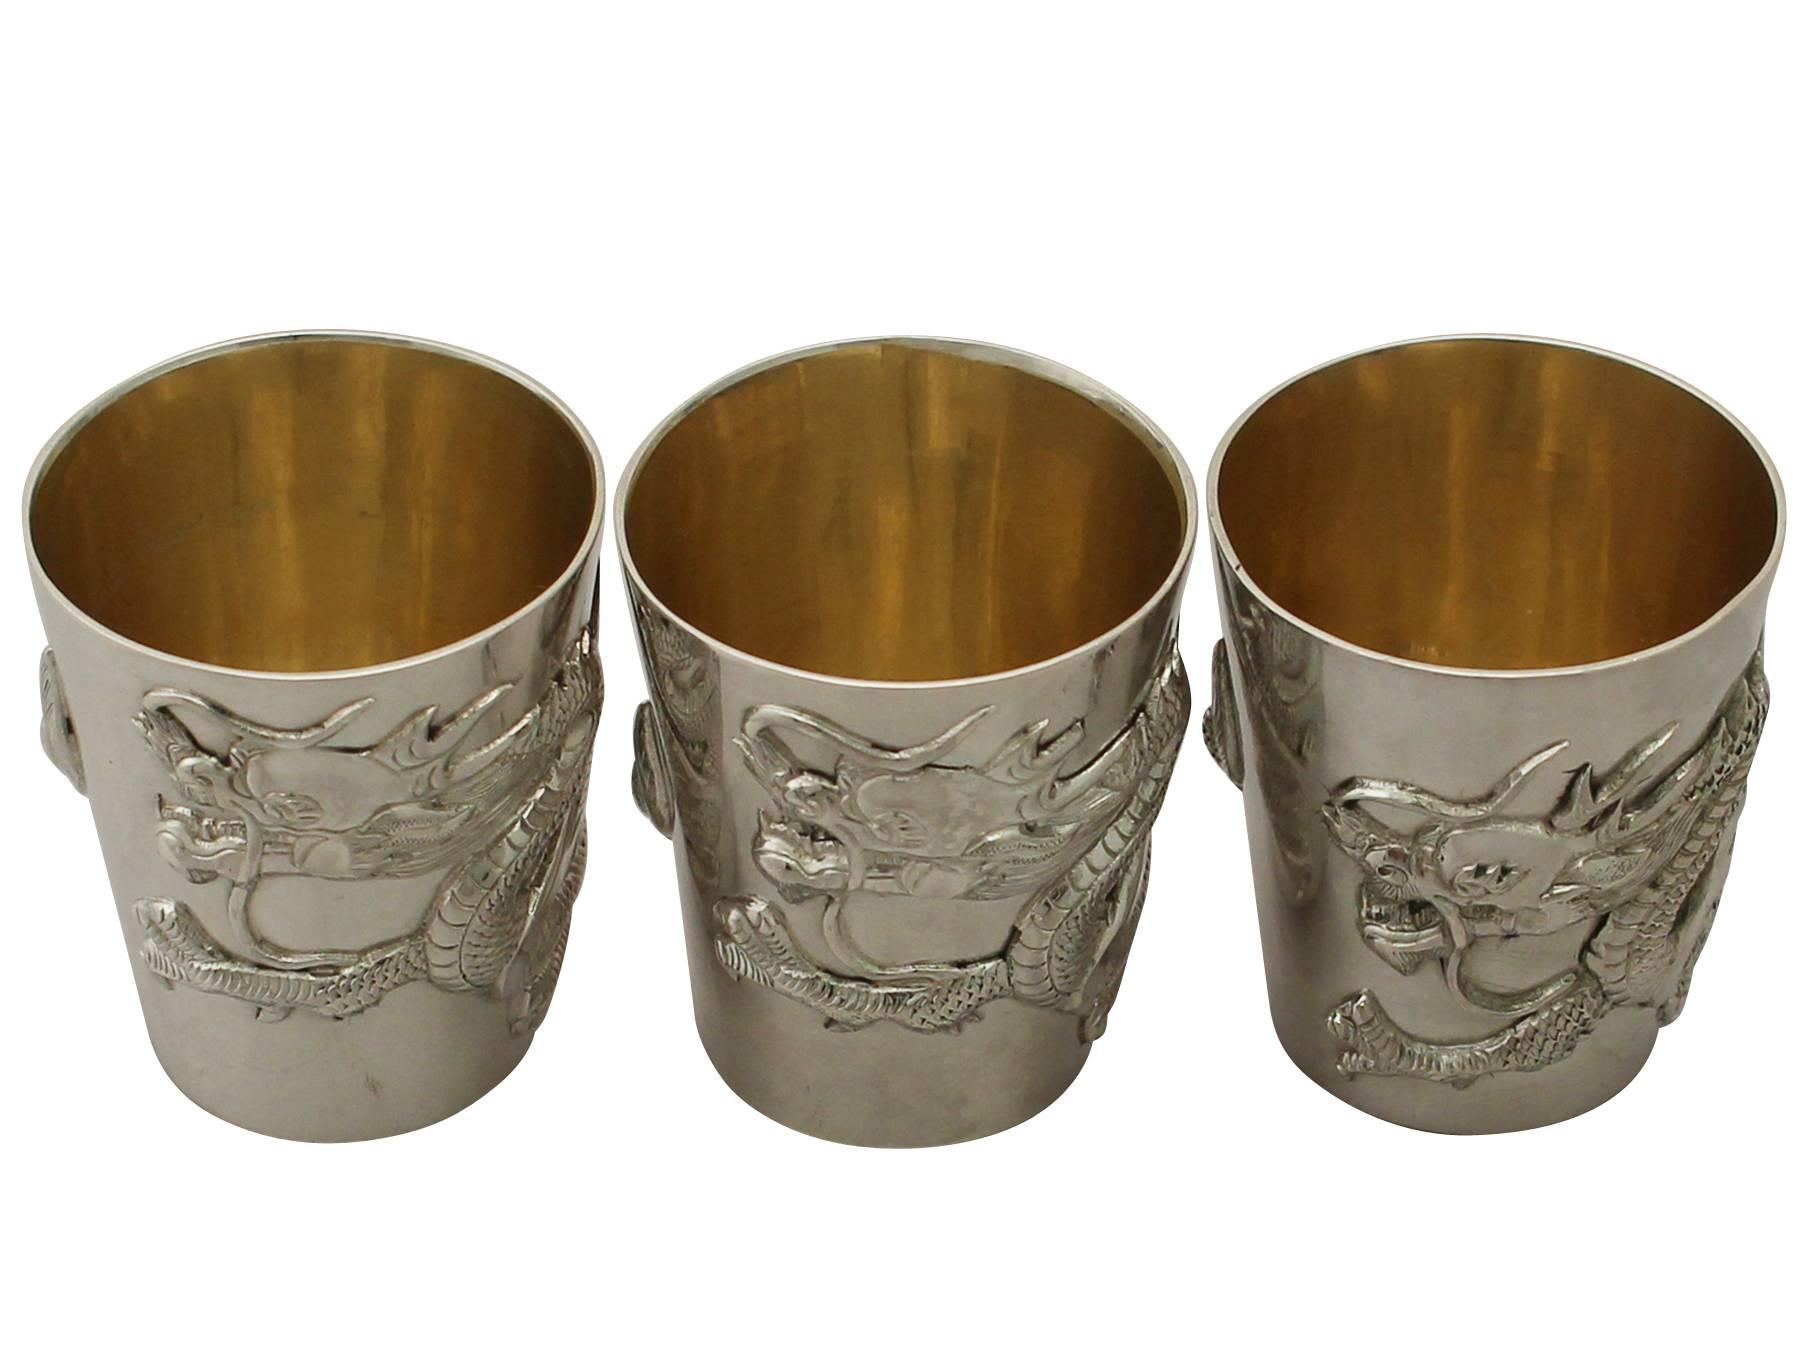 A fine and impressive set of antique Chinese export silver beakers or tots; part of our Asian silverware collection.

This impressive antique Chinese export silver tot or beaker set has a tapering cylindrical tapering form.

The surface of each